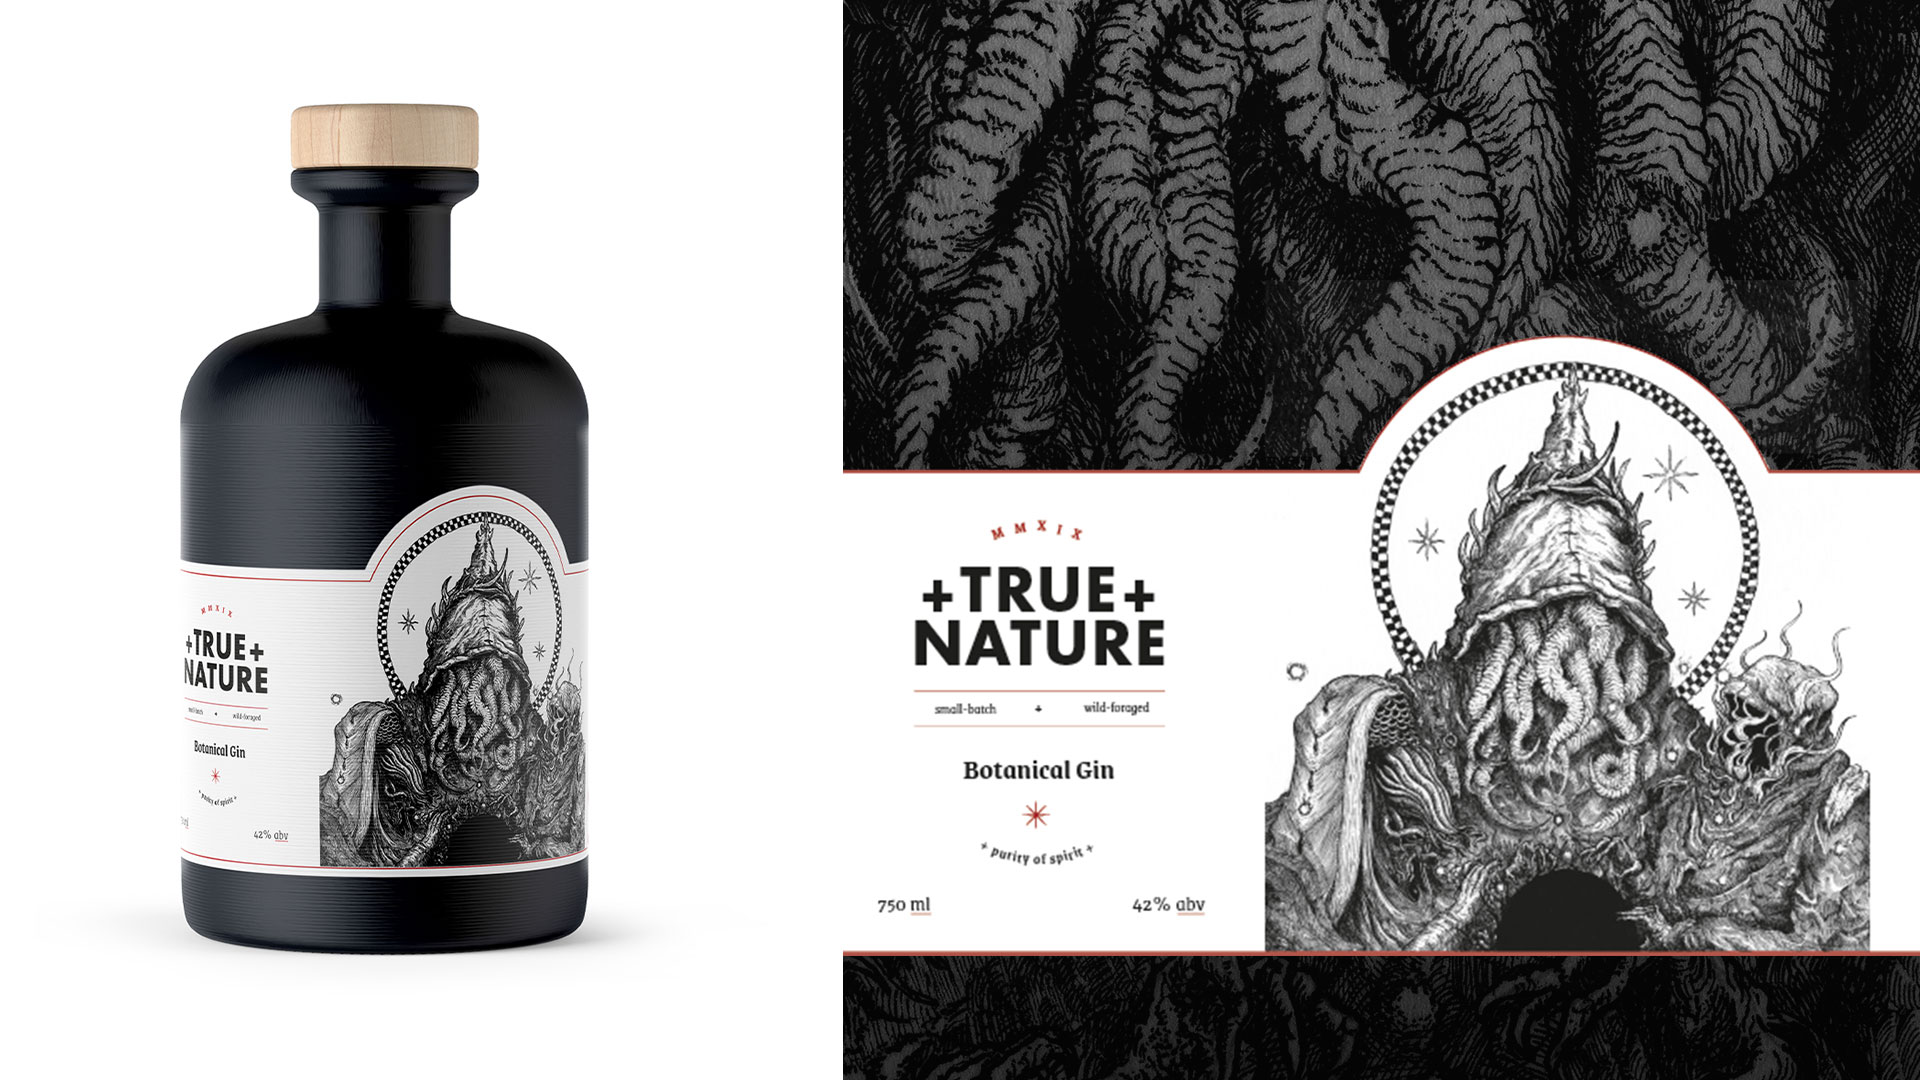 A black bottle of gin sits left, with a second image of the label, superimposed on a textural illustration background.